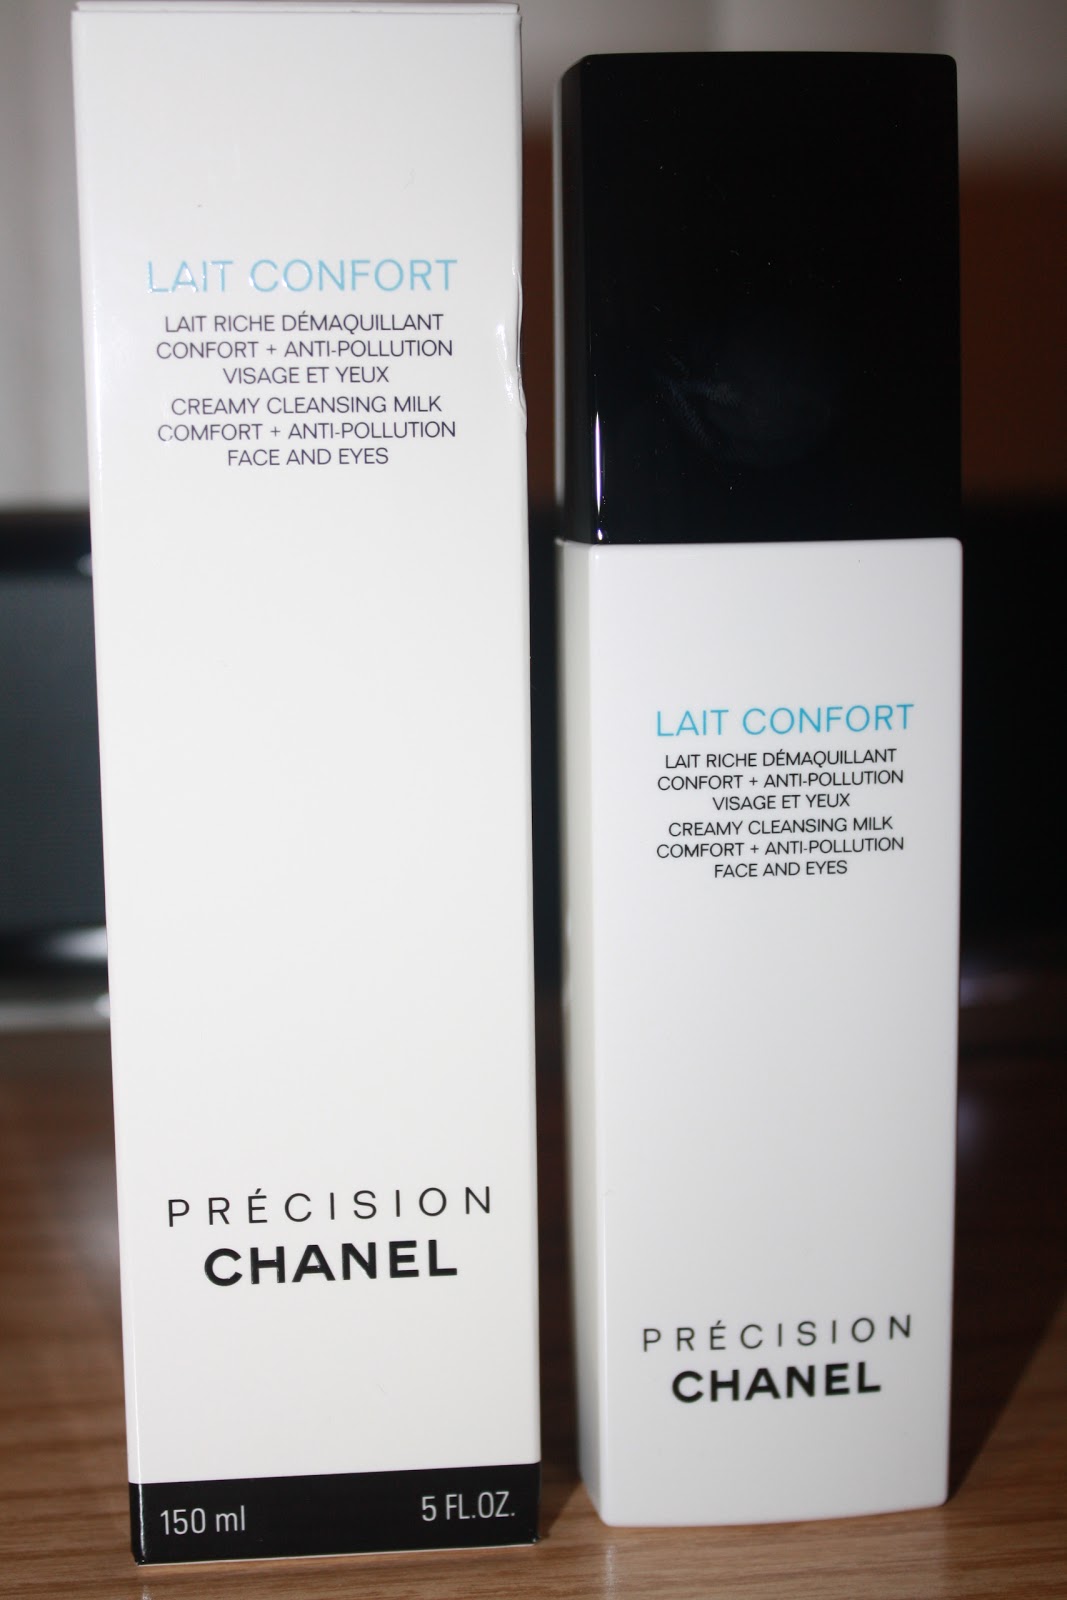 Beauty and Fashion Trends: Chanel Lait Confort Creamy Cleansing Milk